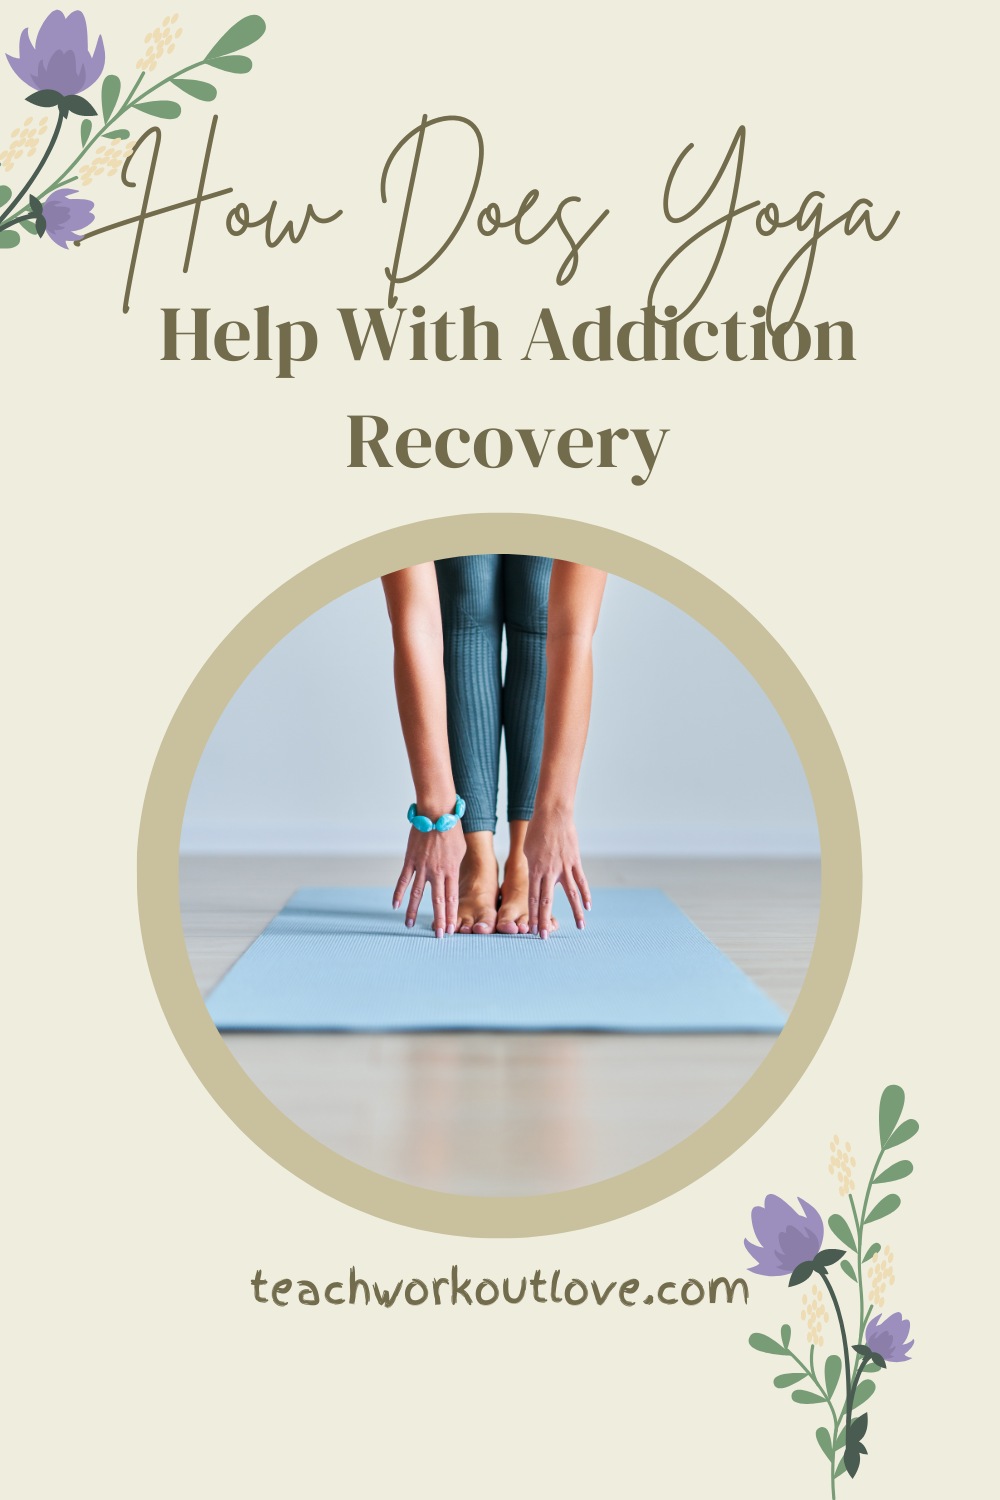 Yoga helps for balancing both mind and body which will reduce addictive behaviors though. As per evidence that will let your imagination change though.